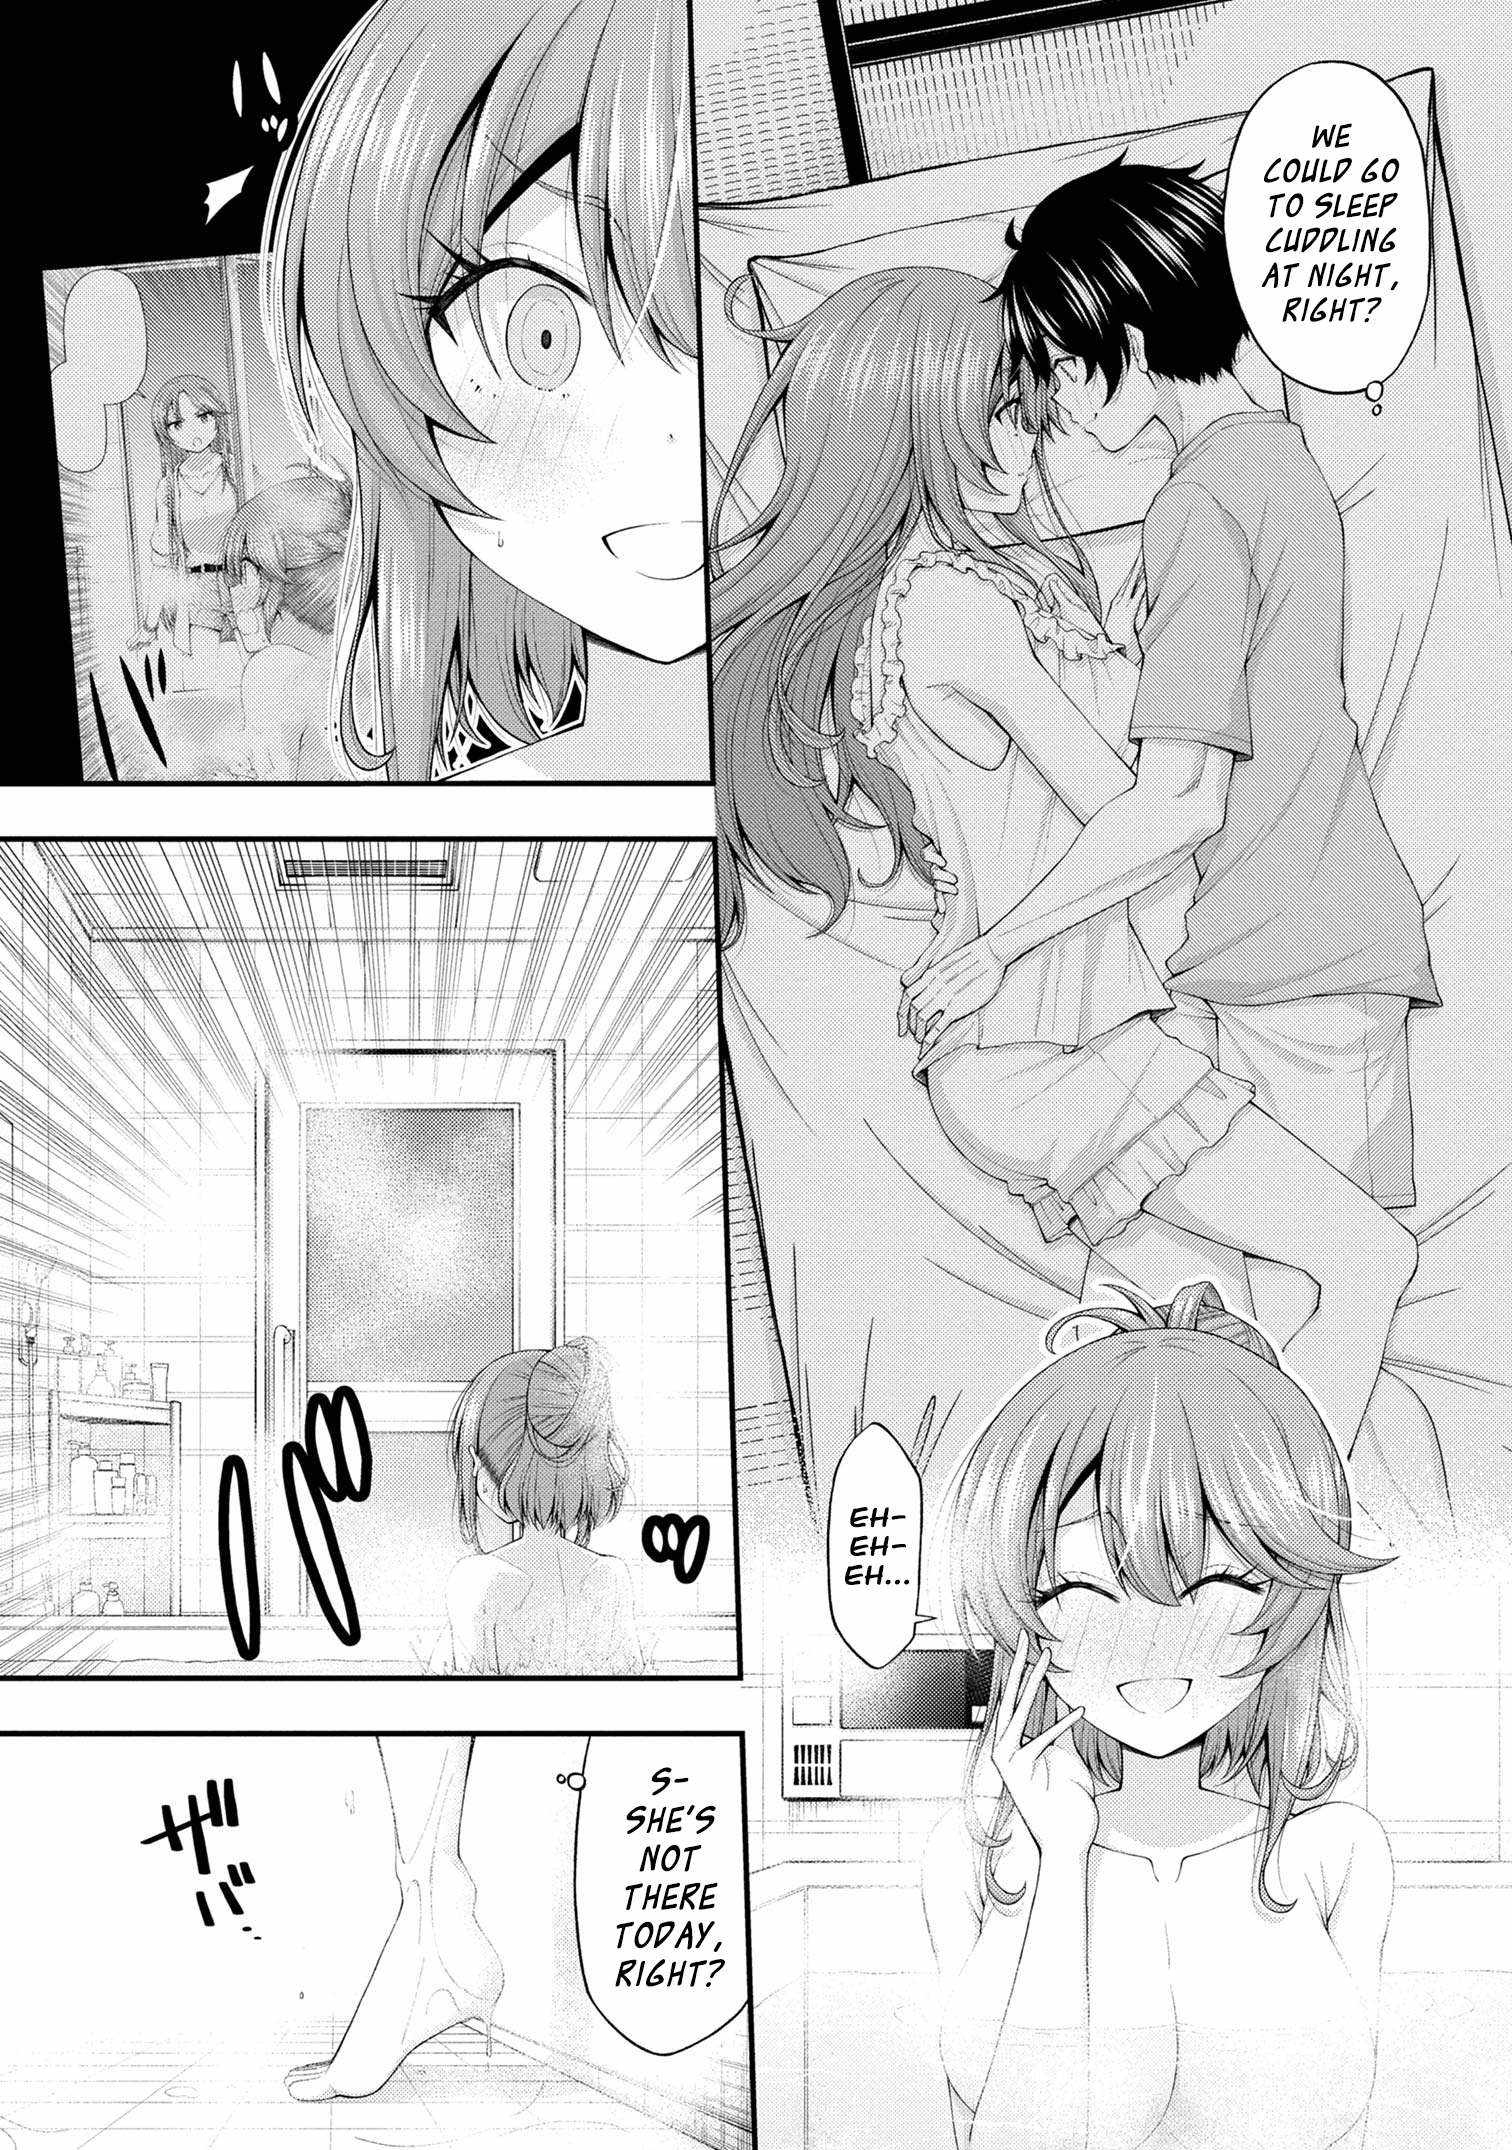 The Gal Who Was Meant to Confess to Me as a Game Punishment Has Apparently Fallen in Love with Me Chapter 12-5-eng-li - Page 4